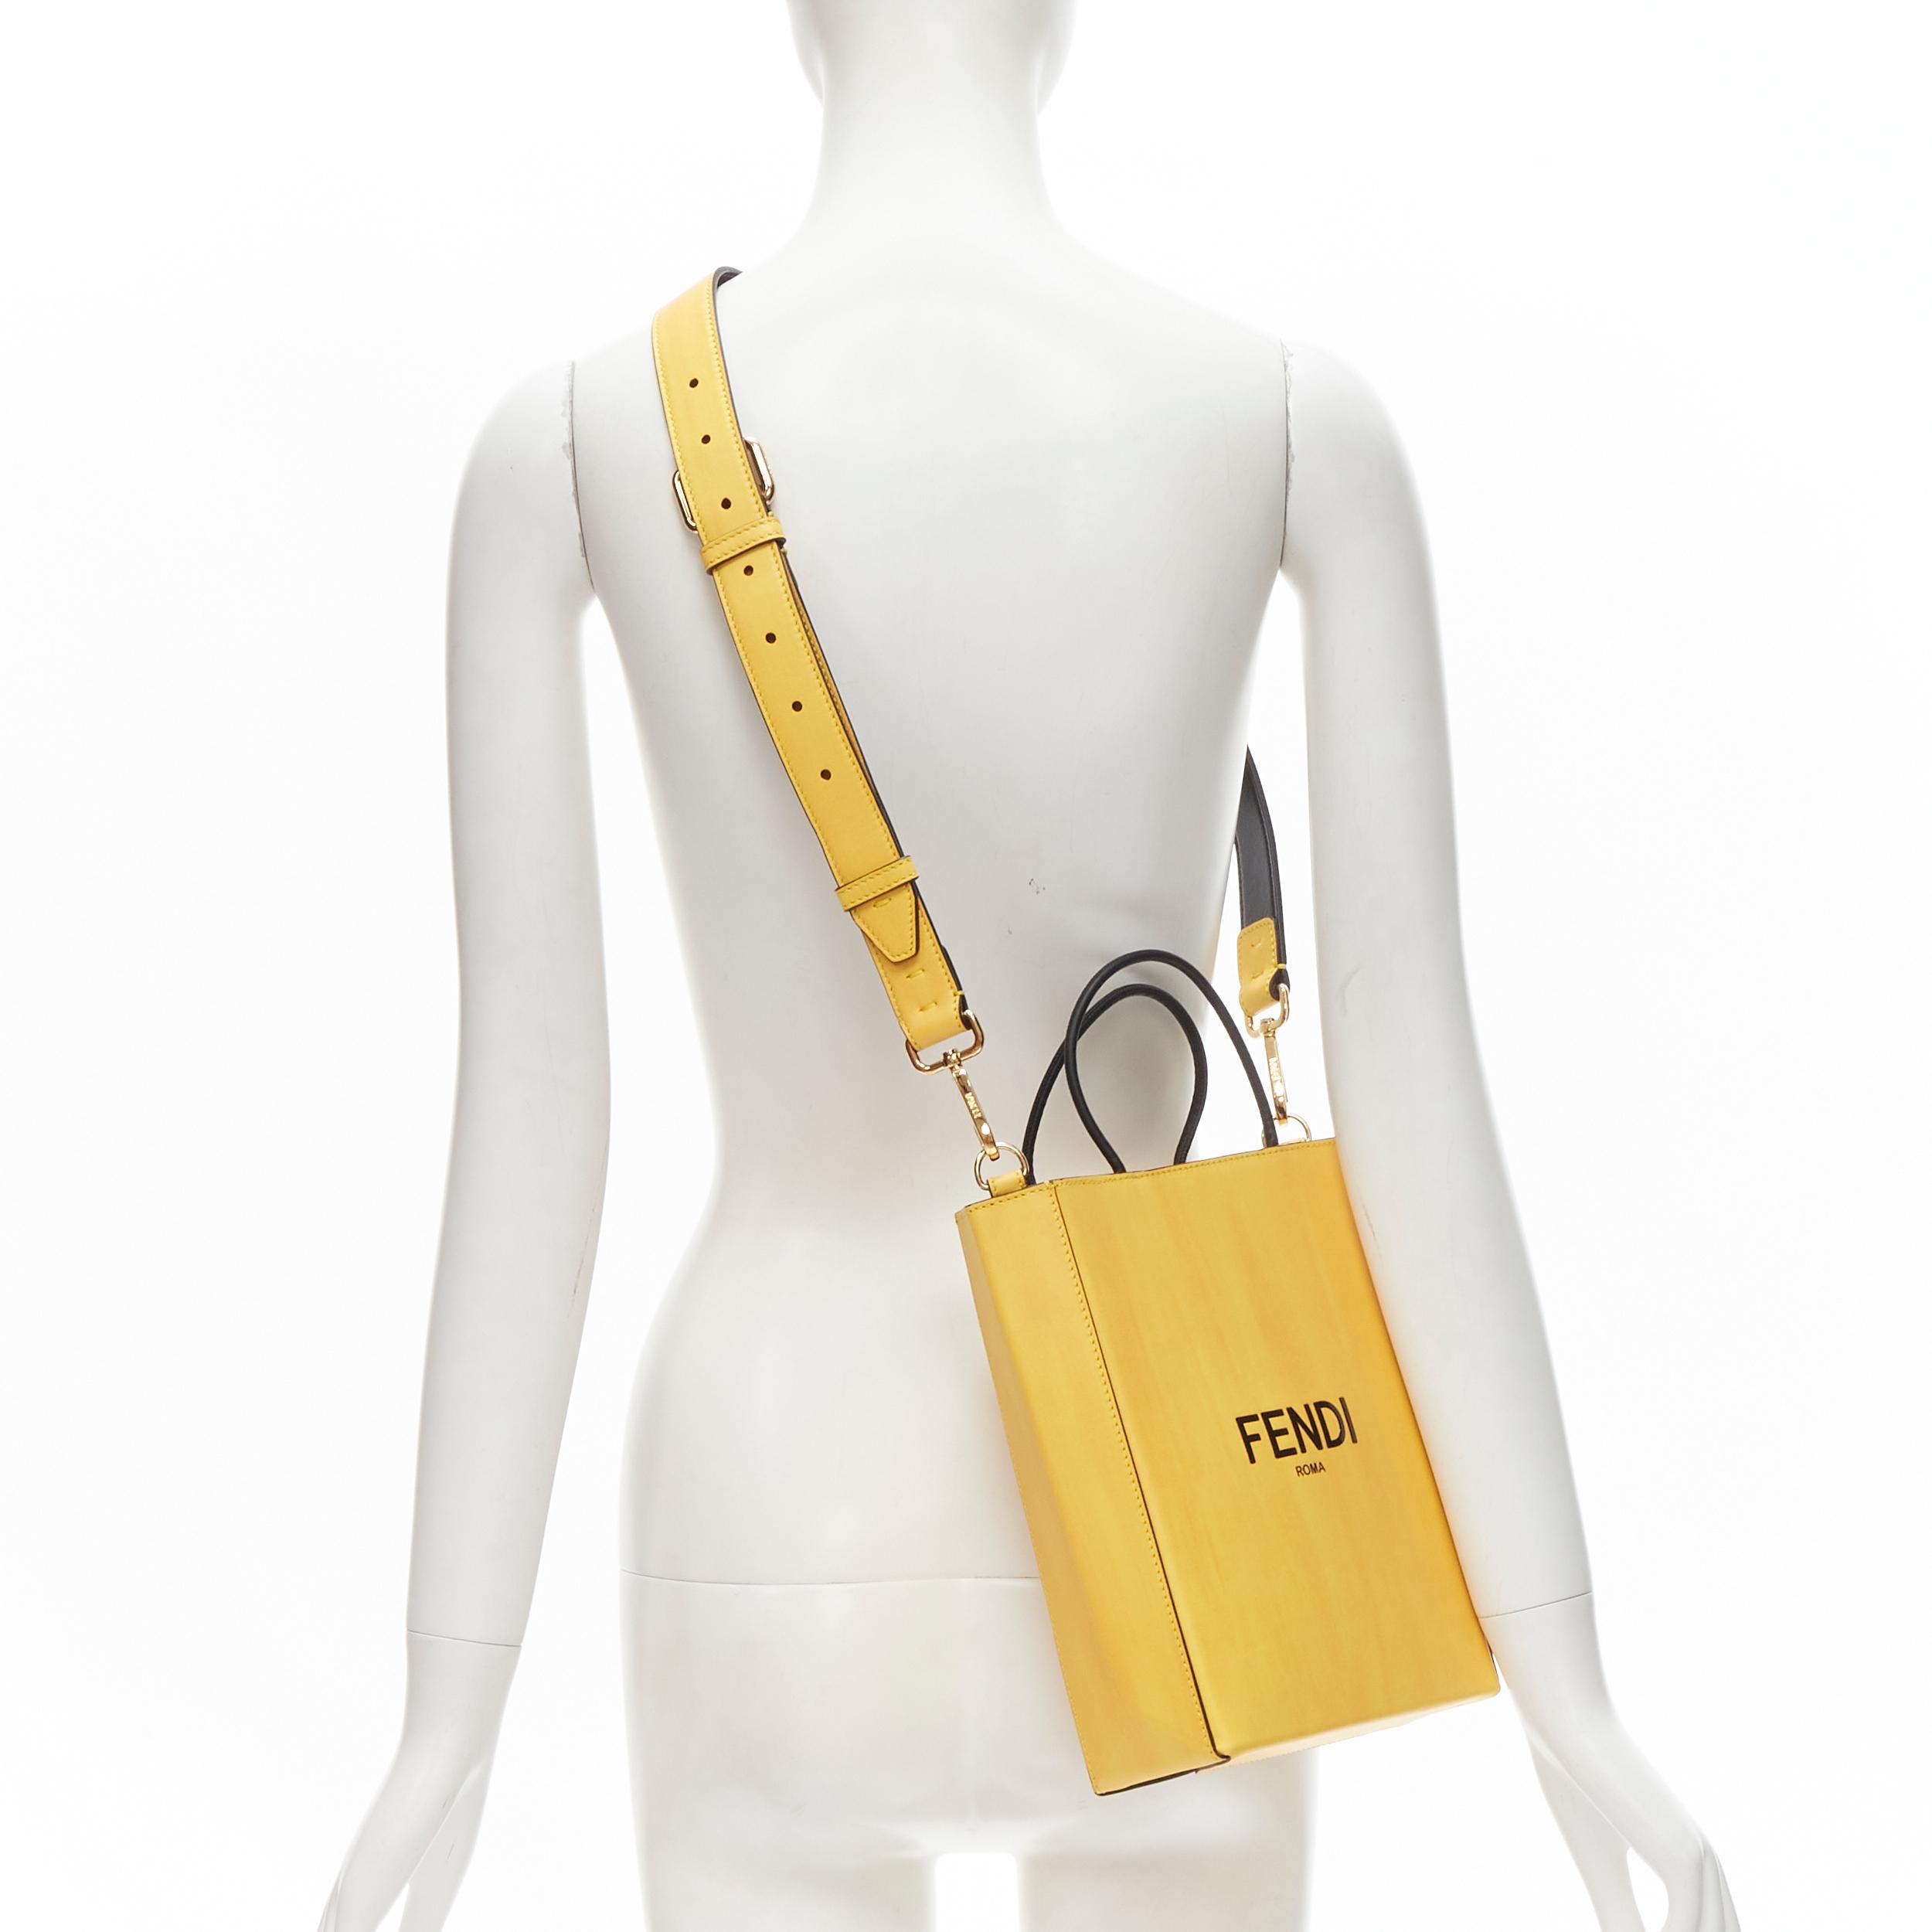 new FENDI Pack Small Shopping yellow leather logo print crossbody tote bag 
Reference: ANWU/A00027 
Brand: Fendi 
Collection: Fendi Pack Runway 
Material: Leather 
Color: Yellow 
Pattern: Solid 
Closure: Magnet 
Extra Detail: Leather tote inspired